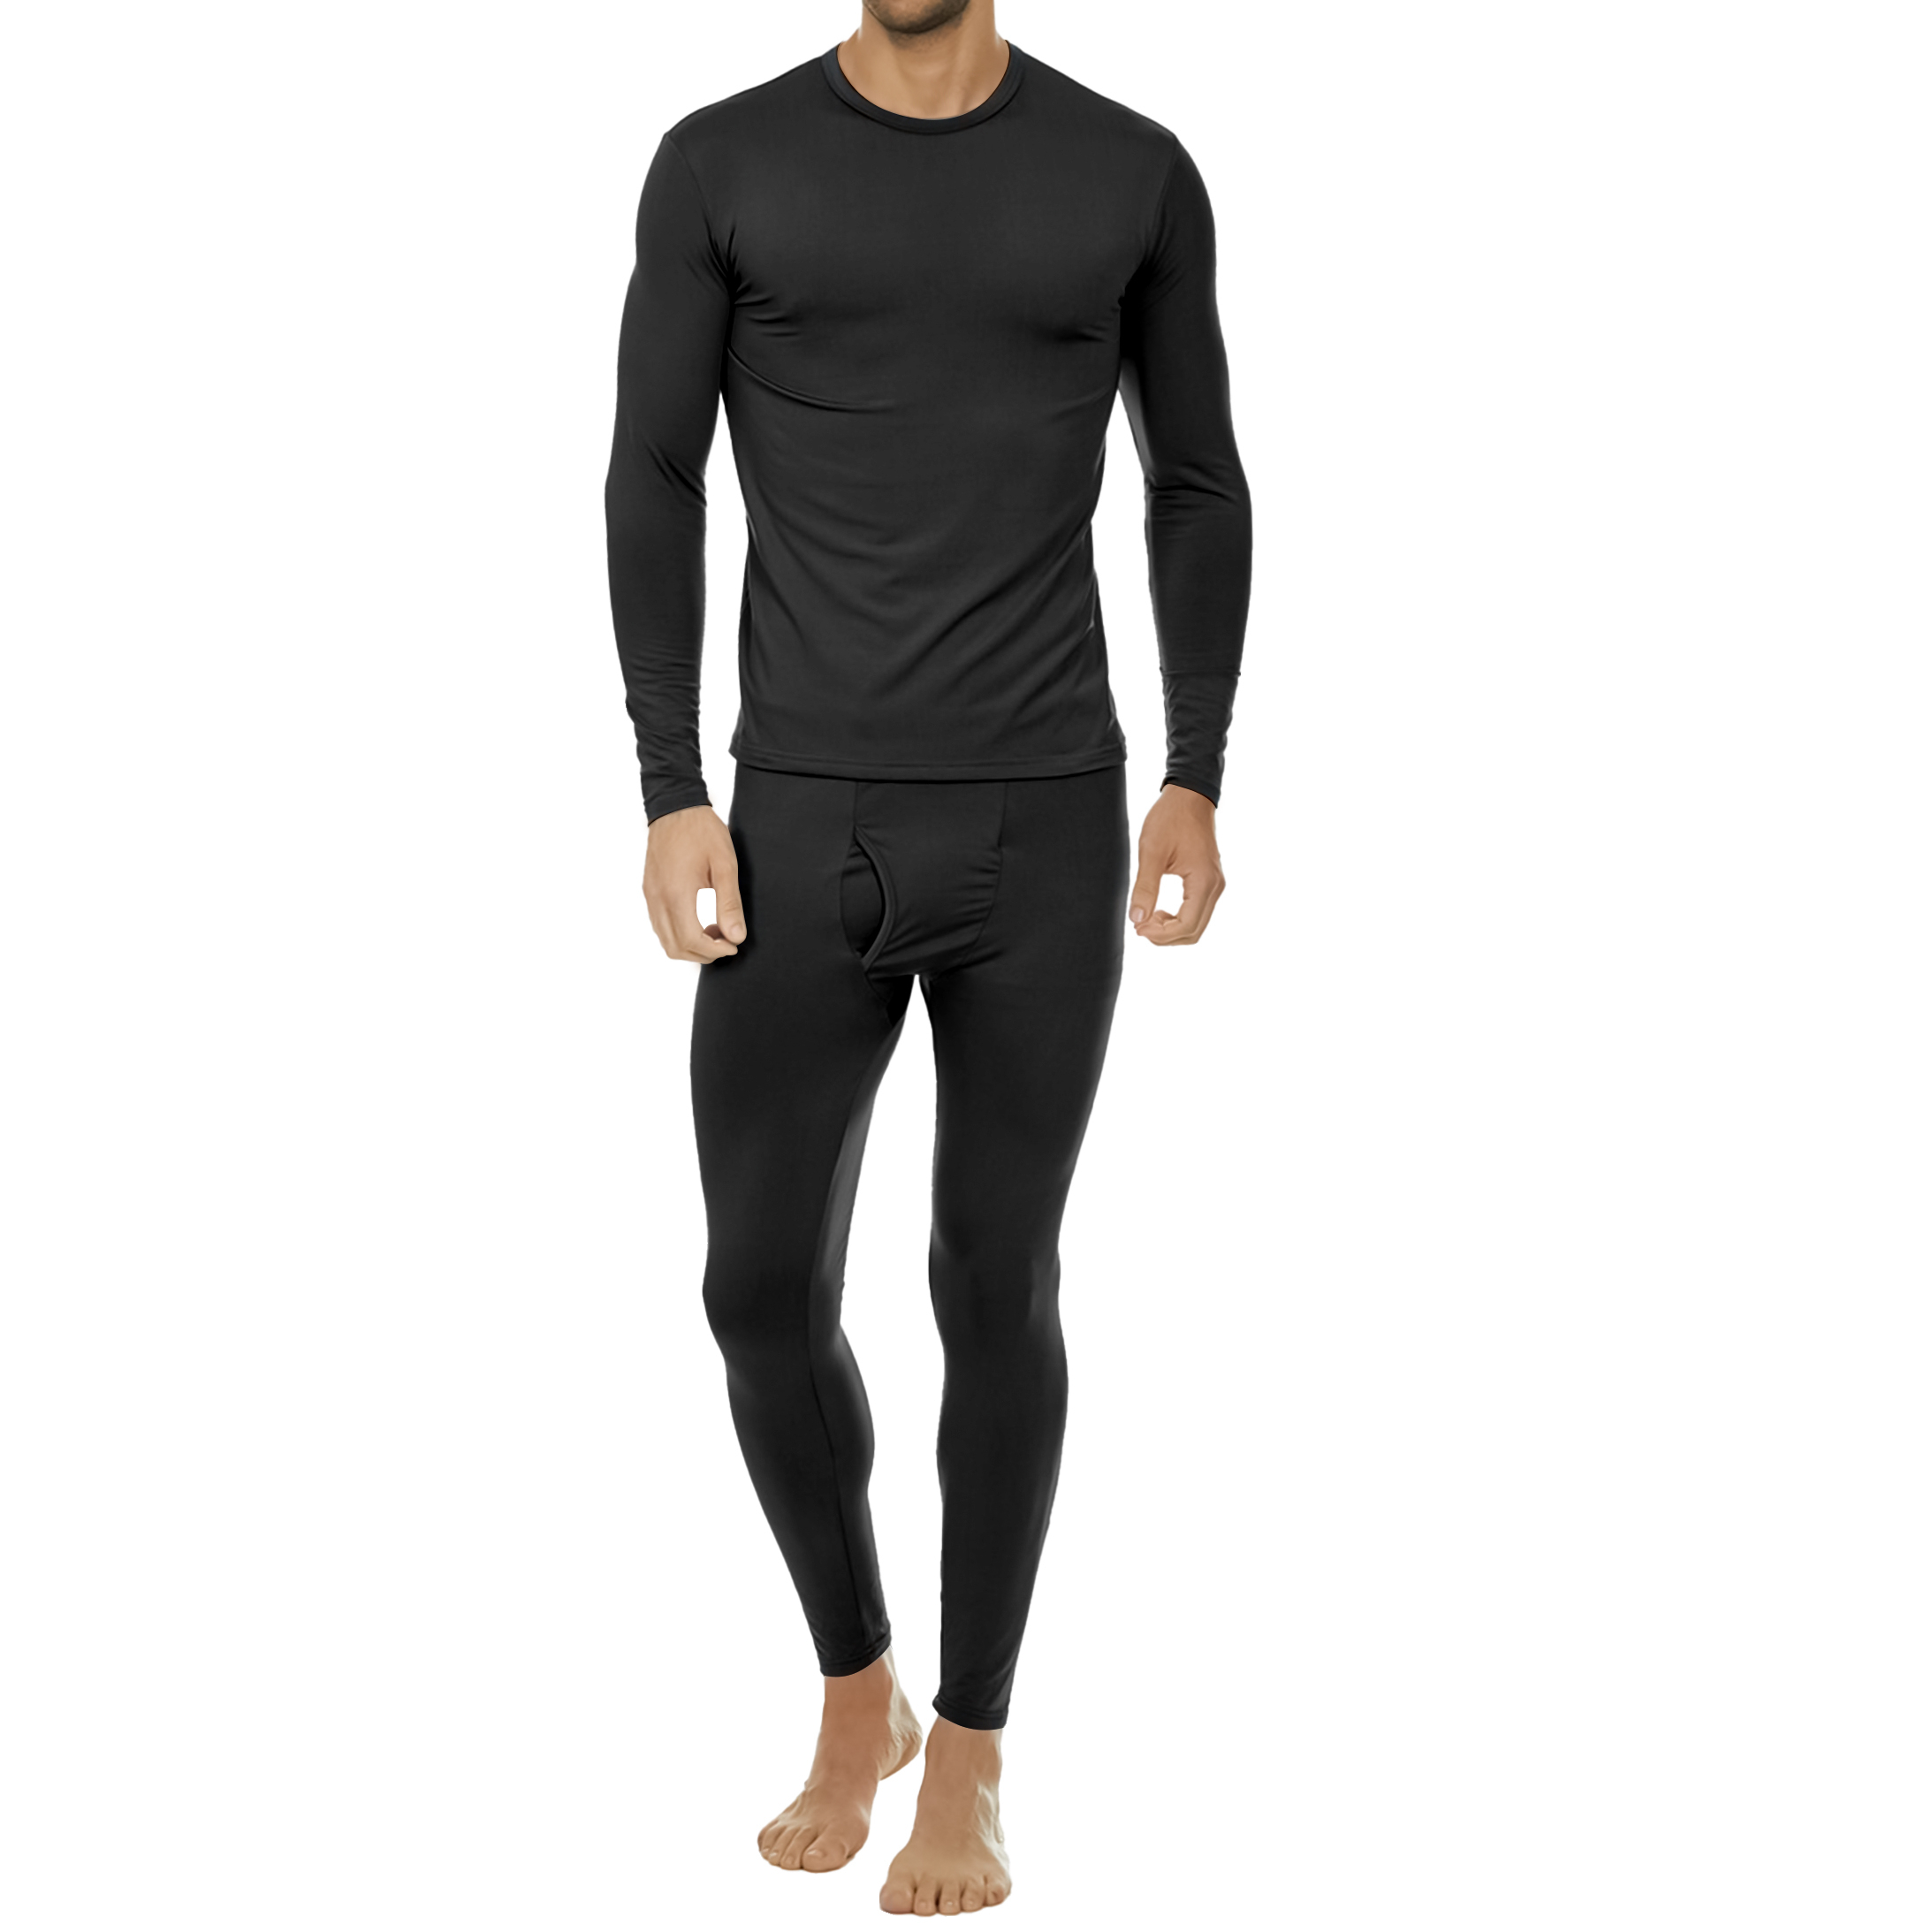 Men's Fleece Lined Thermal Underwear Set For Cold Weather - L